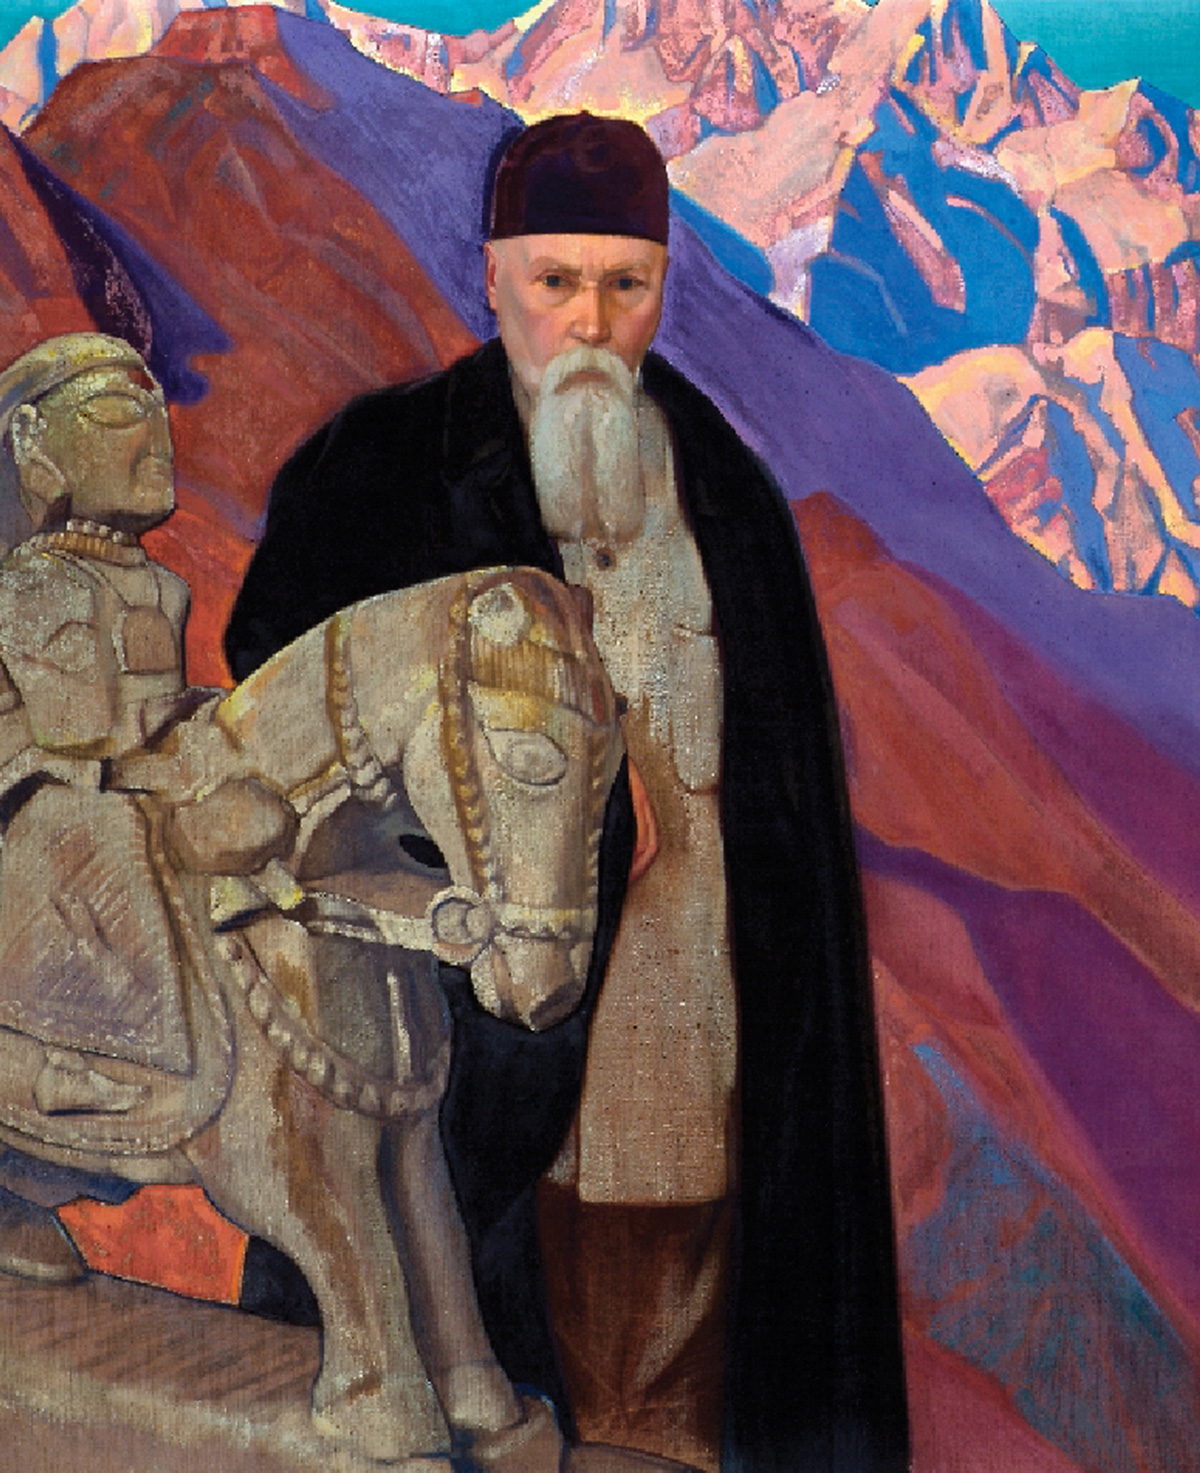 A nineteen thirty seven painting by Svetoslav Roerich titled “Portrait of Nicholas Roerich.”